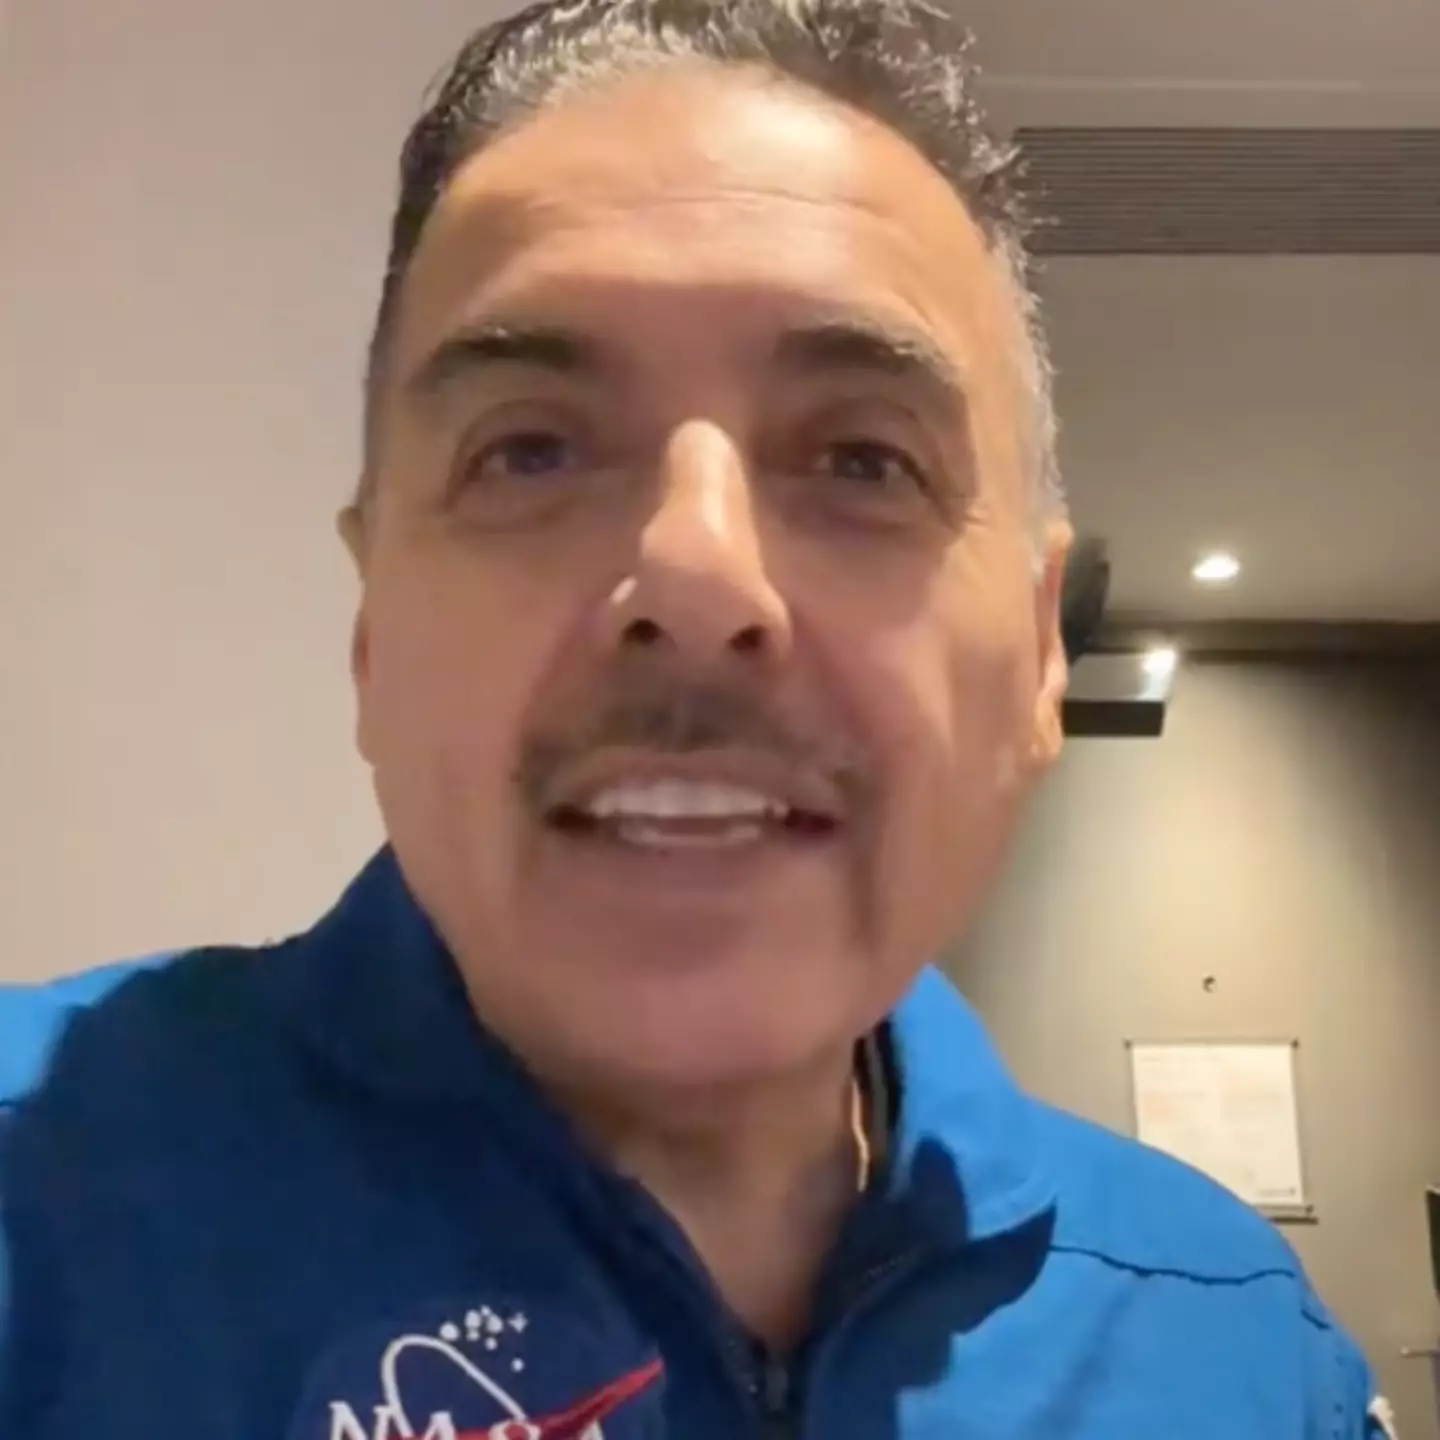 NASA astronaut ‘restores faith in humanity’ with wholesome response to bullied child on TikTok